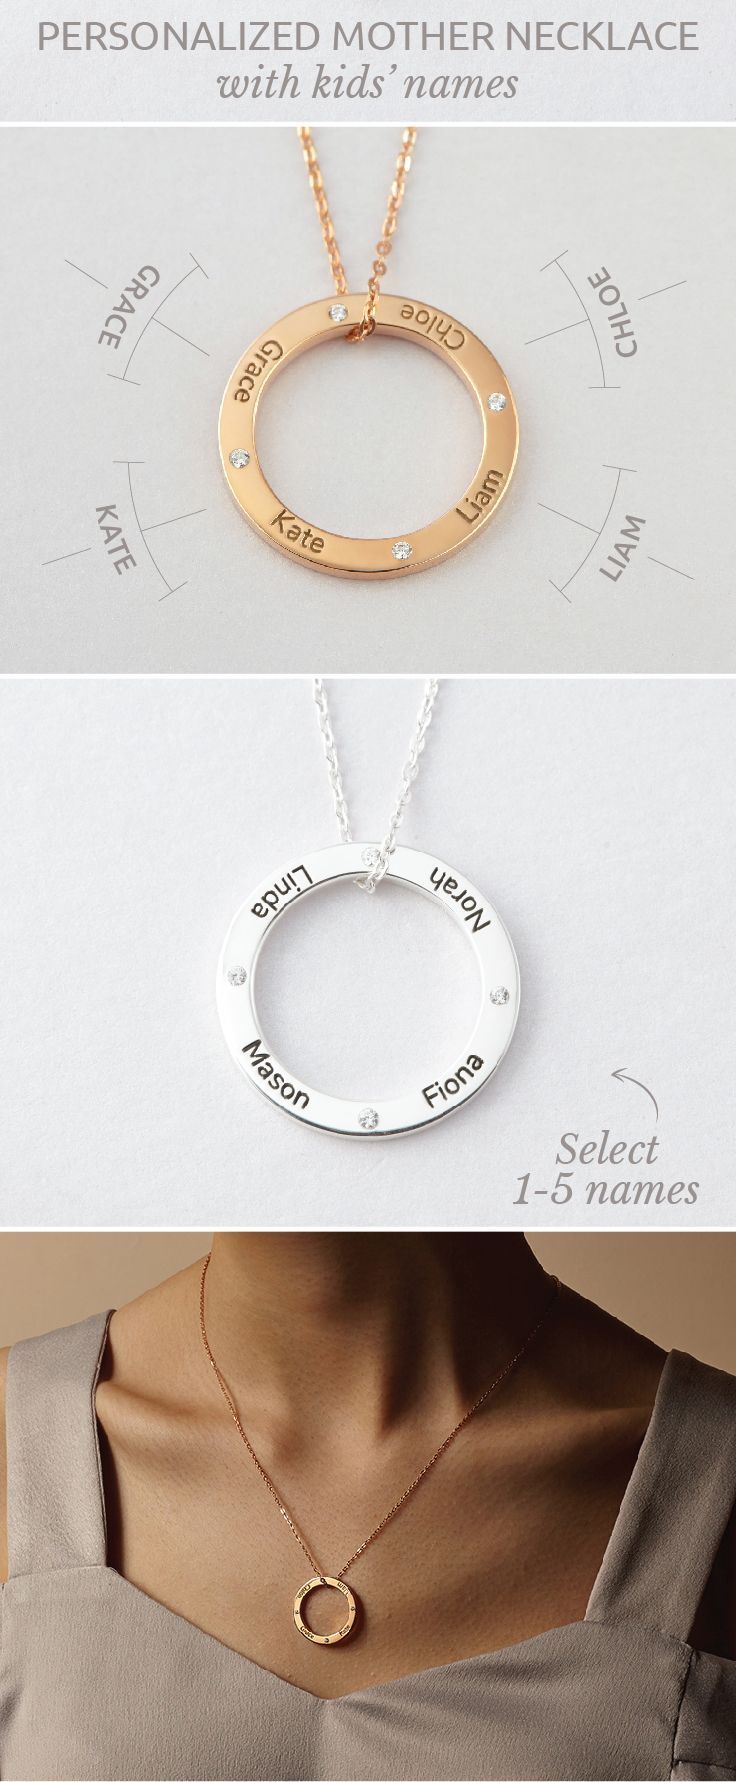 Children's Names Necklace For Mother - Circle of Love -   25 diy necklace for mom
 ideas